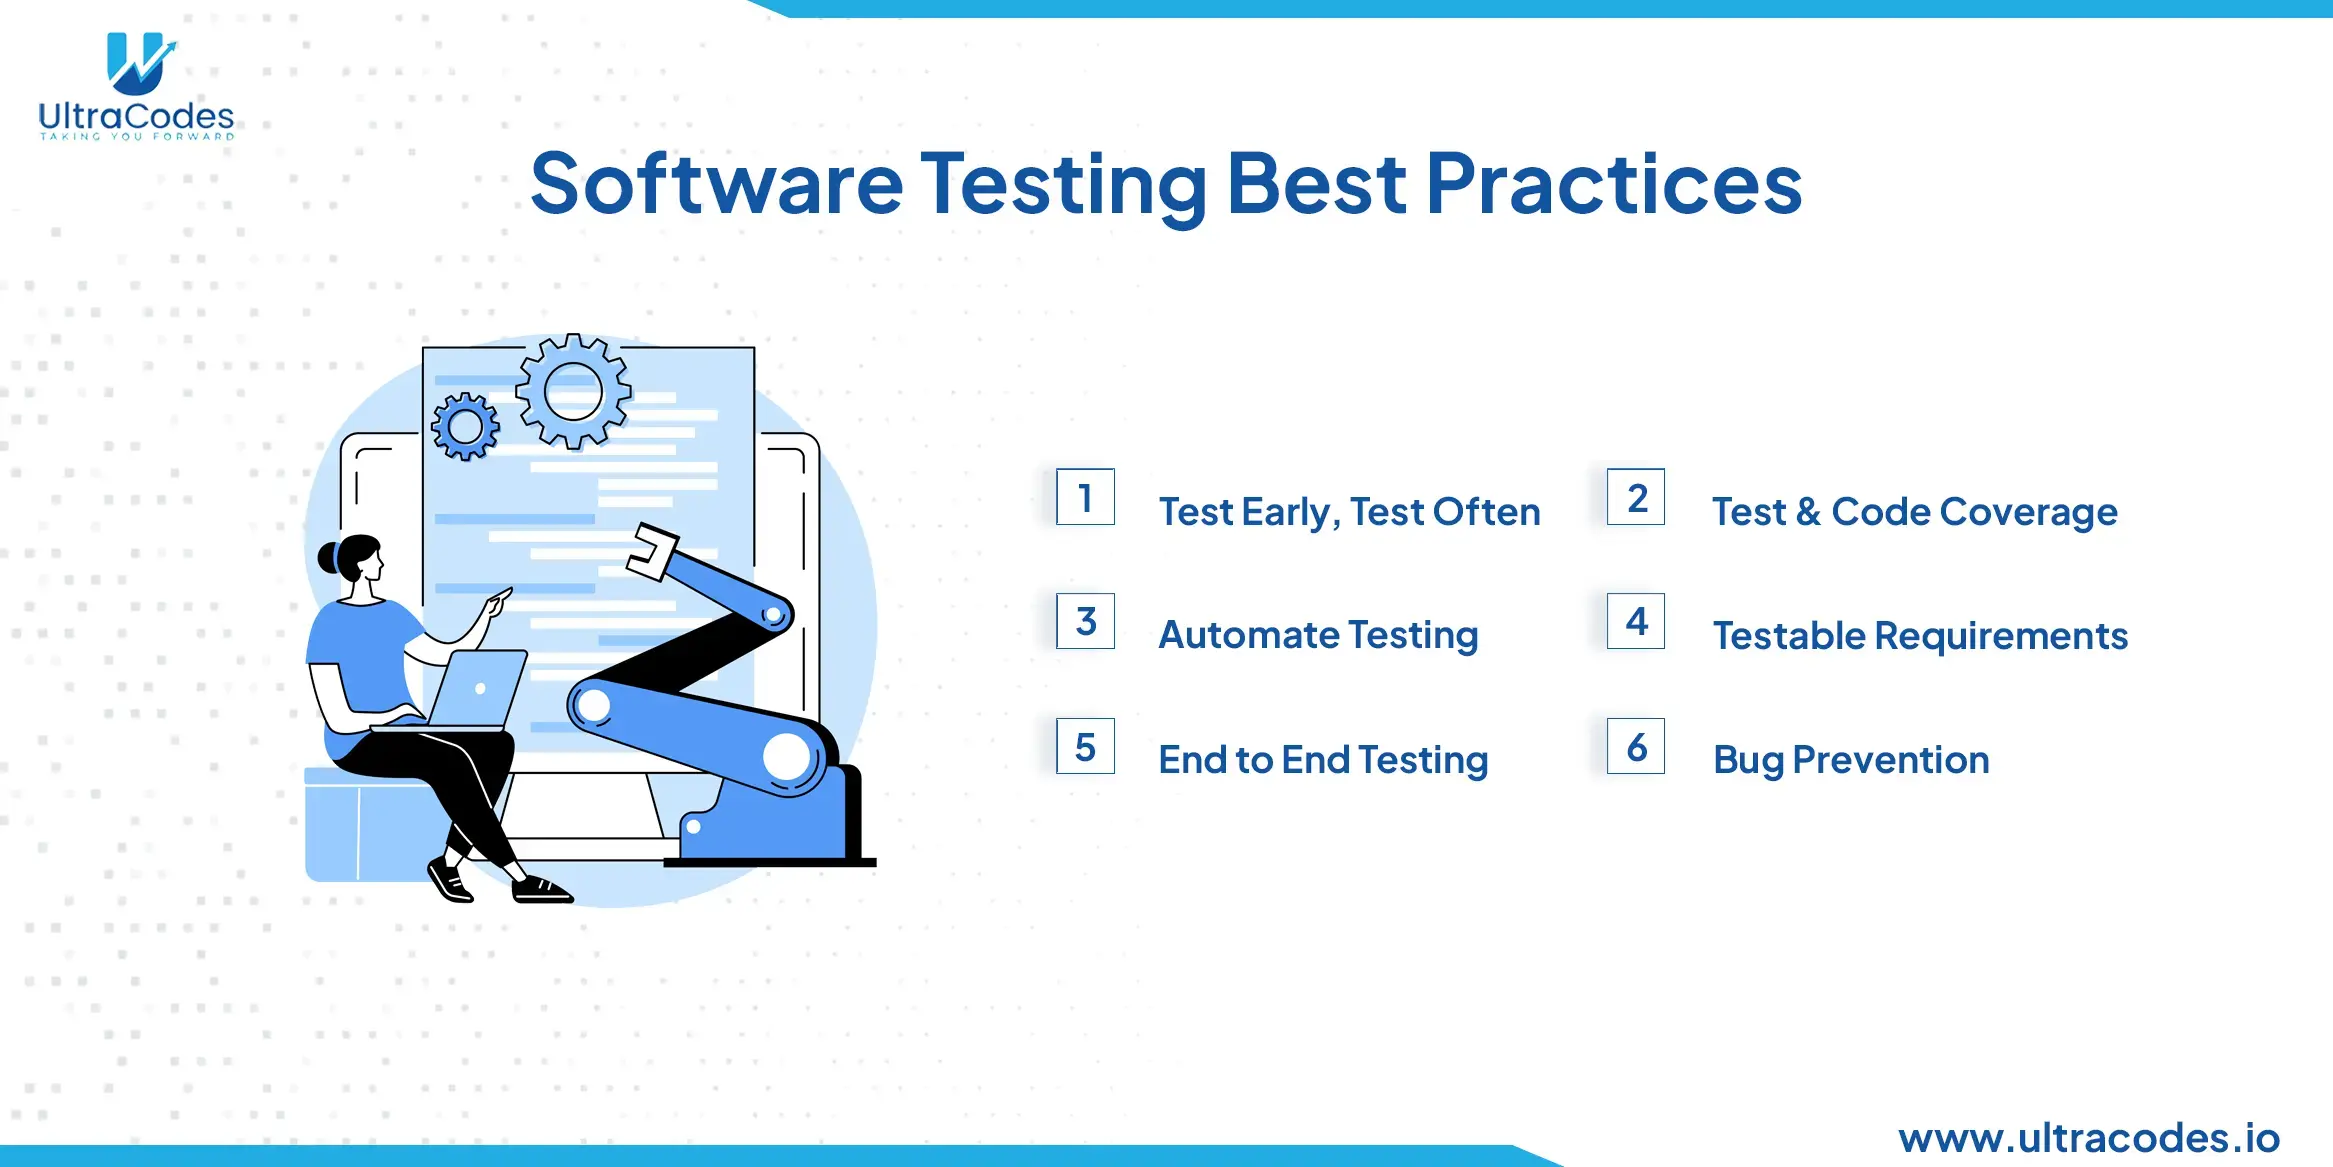 Best Practices for Software Testing Steps Explained